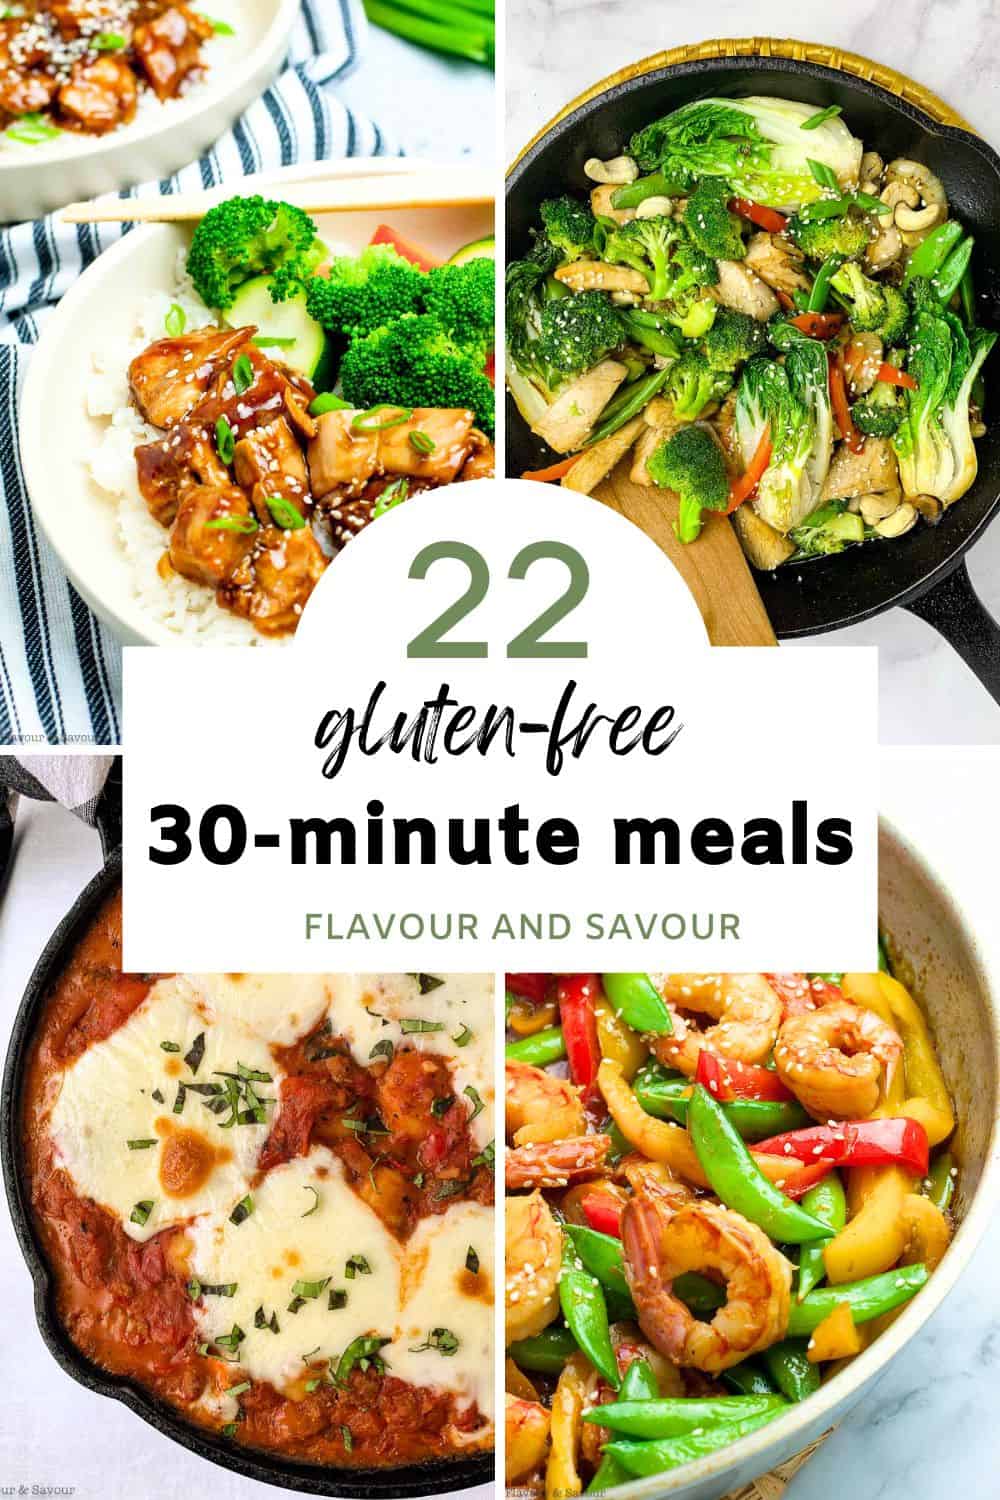 Image with text overlay for gluten-free 30-minute meal ideas.